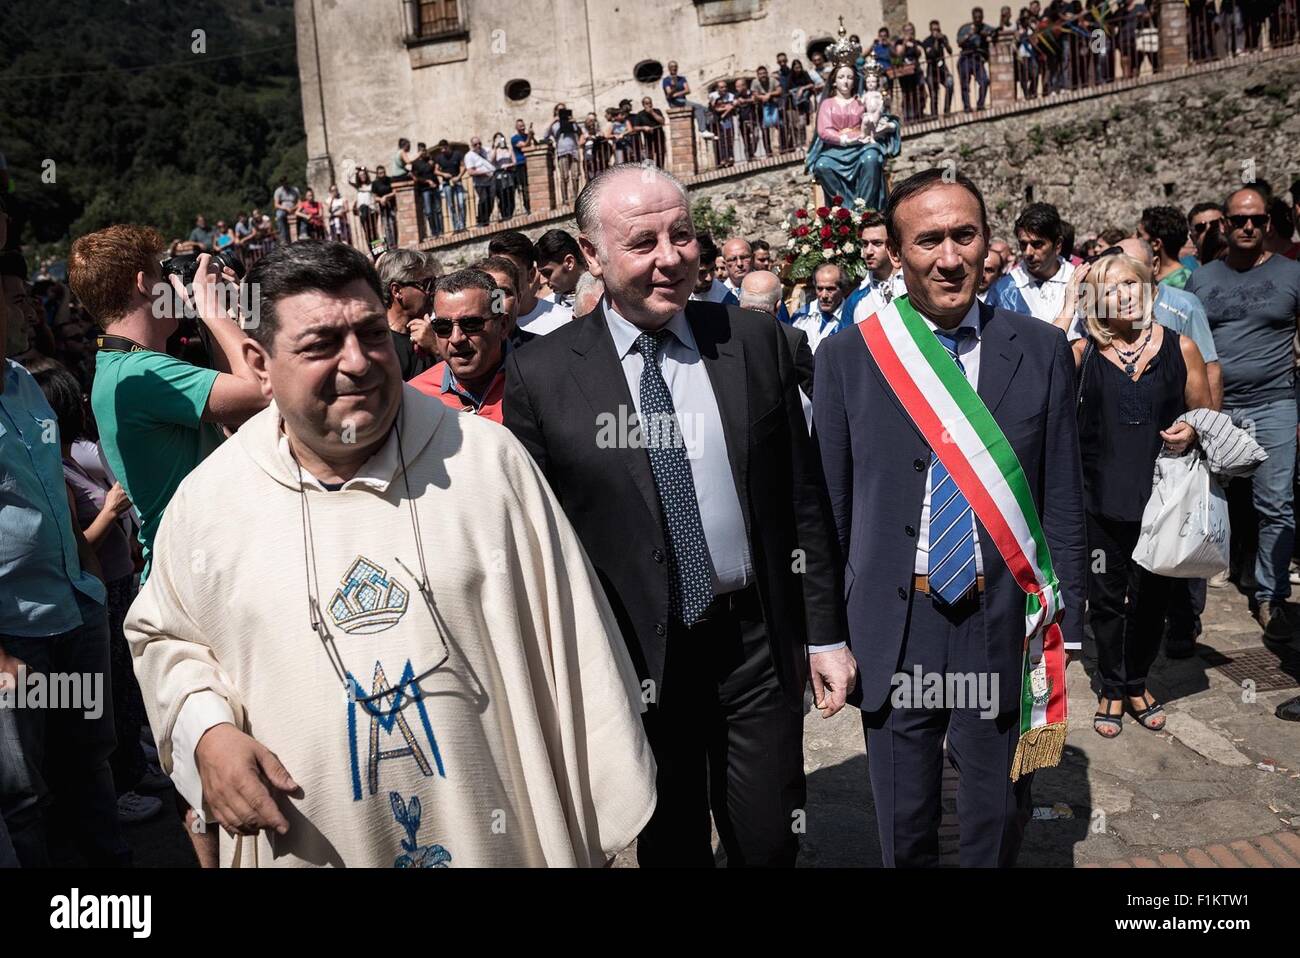 San Luca, Italy. 02nd Sep, 2015. The Prefectural Commissioner Salvatore Gullì (left), the pastor of the Sanctuary of Santa Maria di Polsi, Don Pino Strangio (center) and the president of the province of Reggio Calabria, Giuseppe Raffa (right), join the parade and headed the procession. The Sanctuary of Our Lady of Polsi is also known as the Sanctuary of Santa Maria di Polsi or the Our Lady of the Mountain. It is a Christian sanctuary in the heart of the Aspromonte mountains, near San Luca in Calabria, southern Italy. © Michele Amoruso/Pacific Press/Alamy Live News Stock Photo